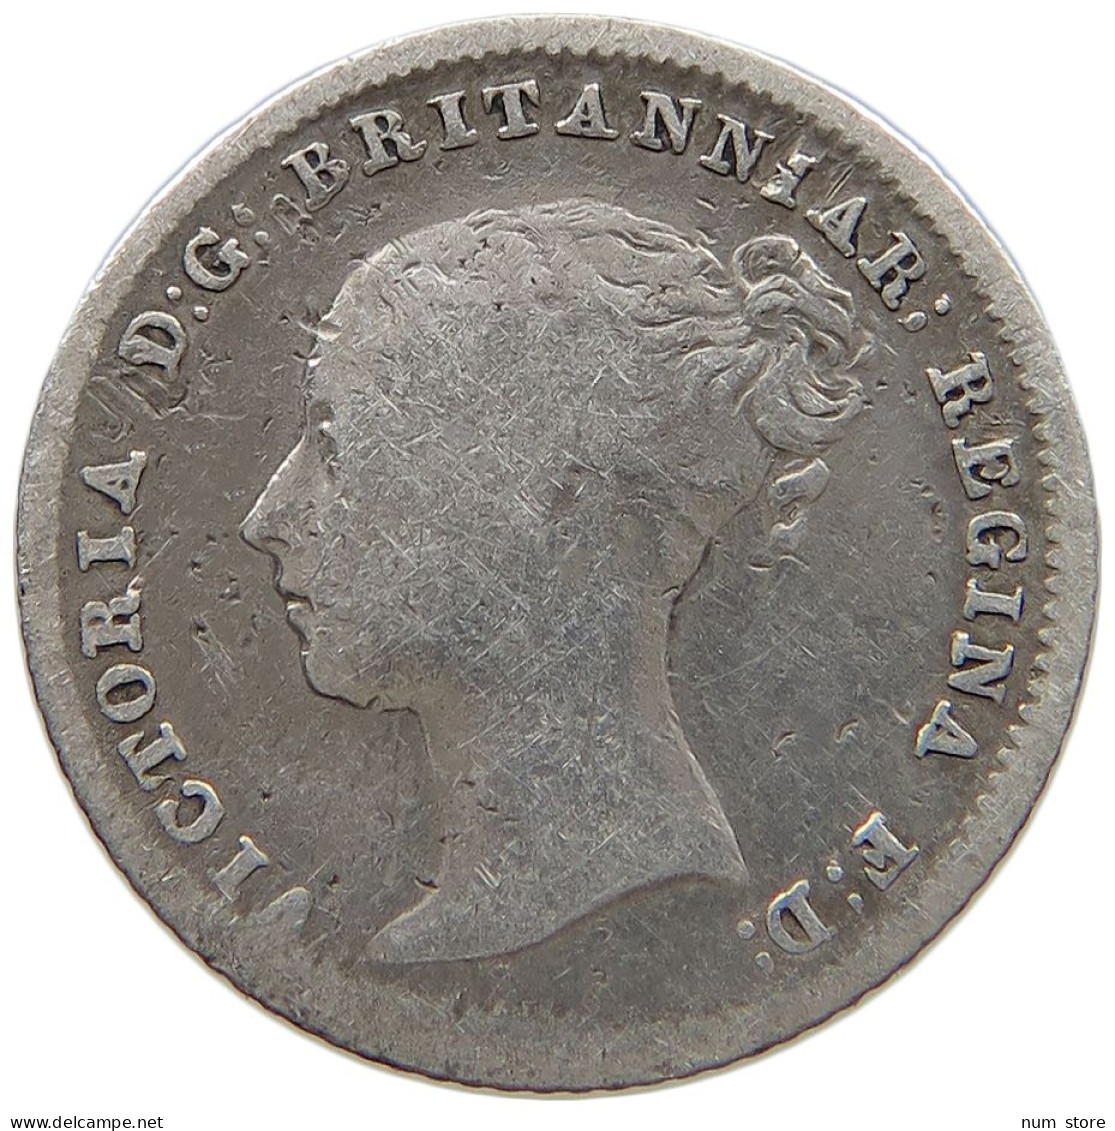 GREAT BRITAIN FOURPENCE 1840 VICTORIA 1837-1901 #MA 024847 - G. 4 Pence/ Groat